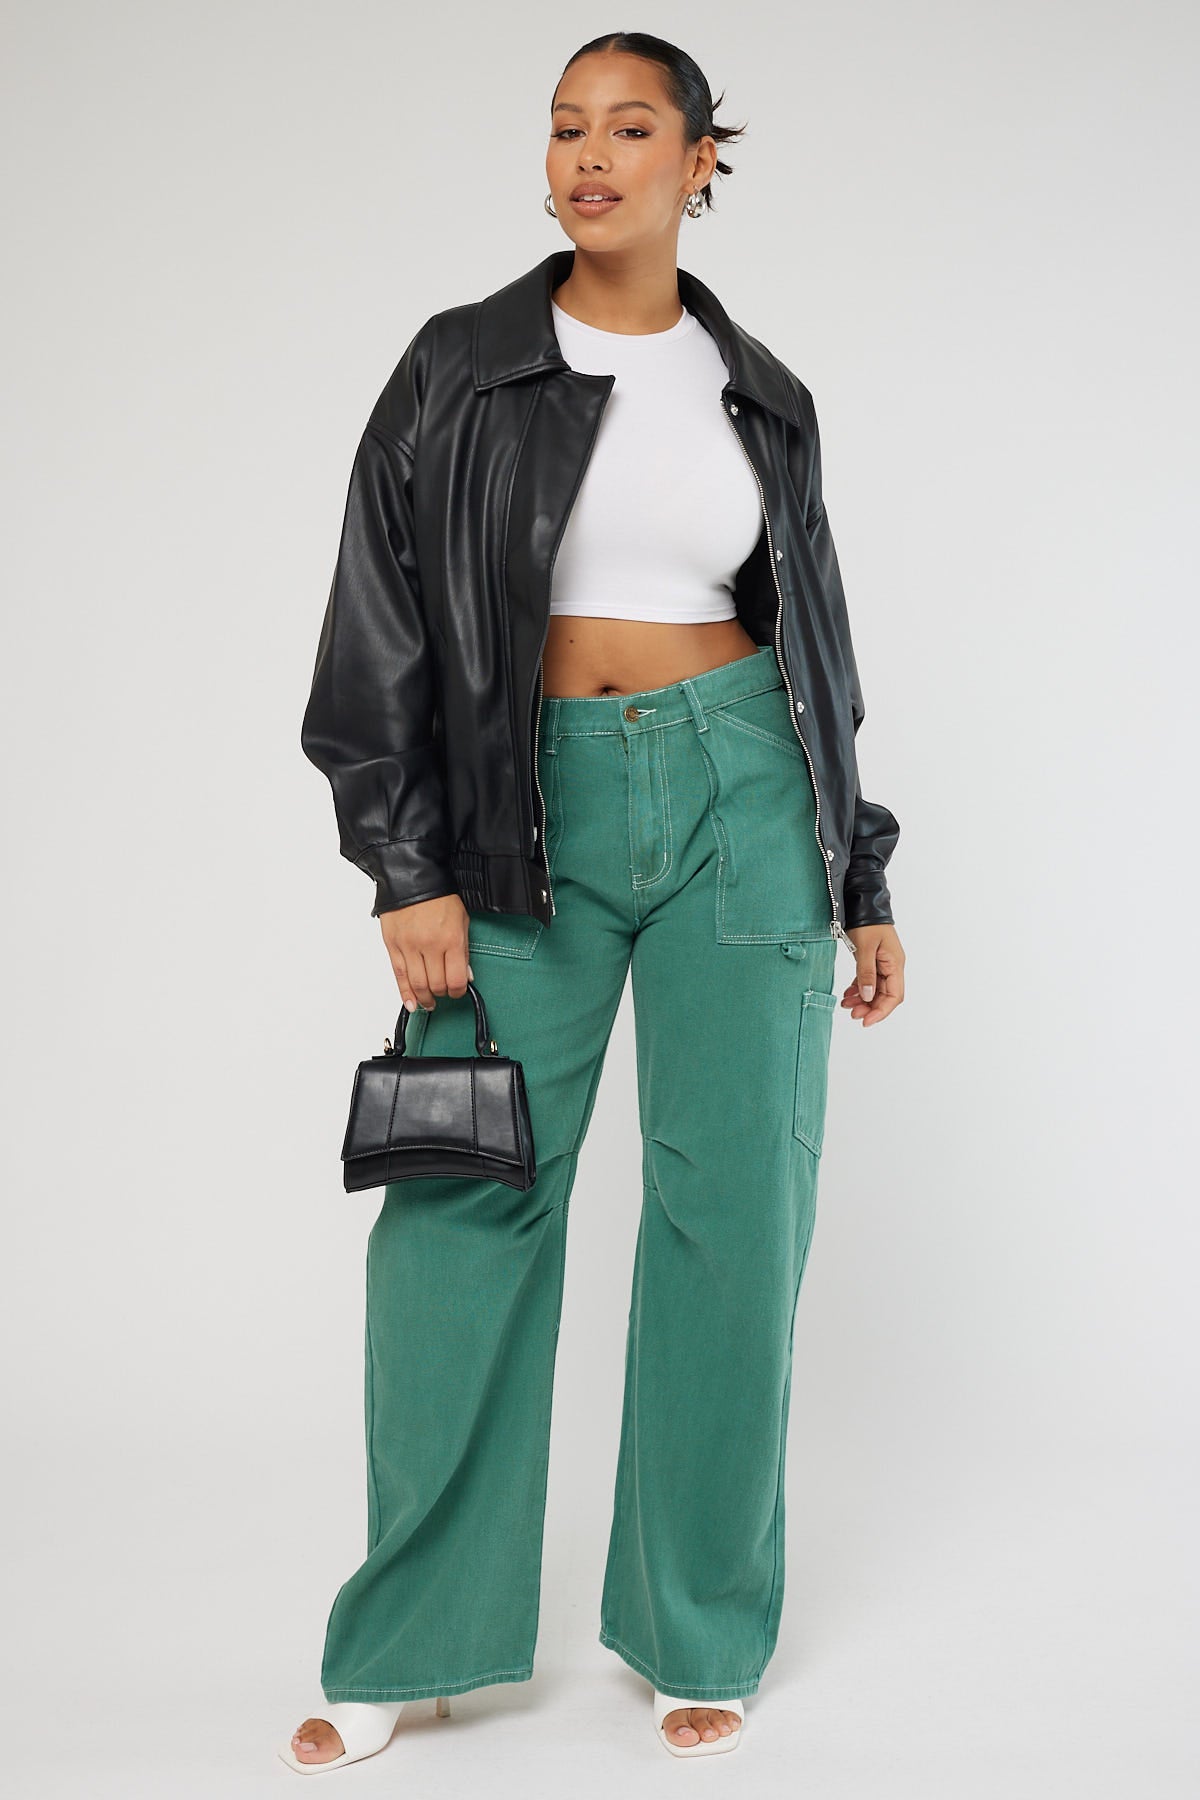 Lioness Miami Vice Pant Green